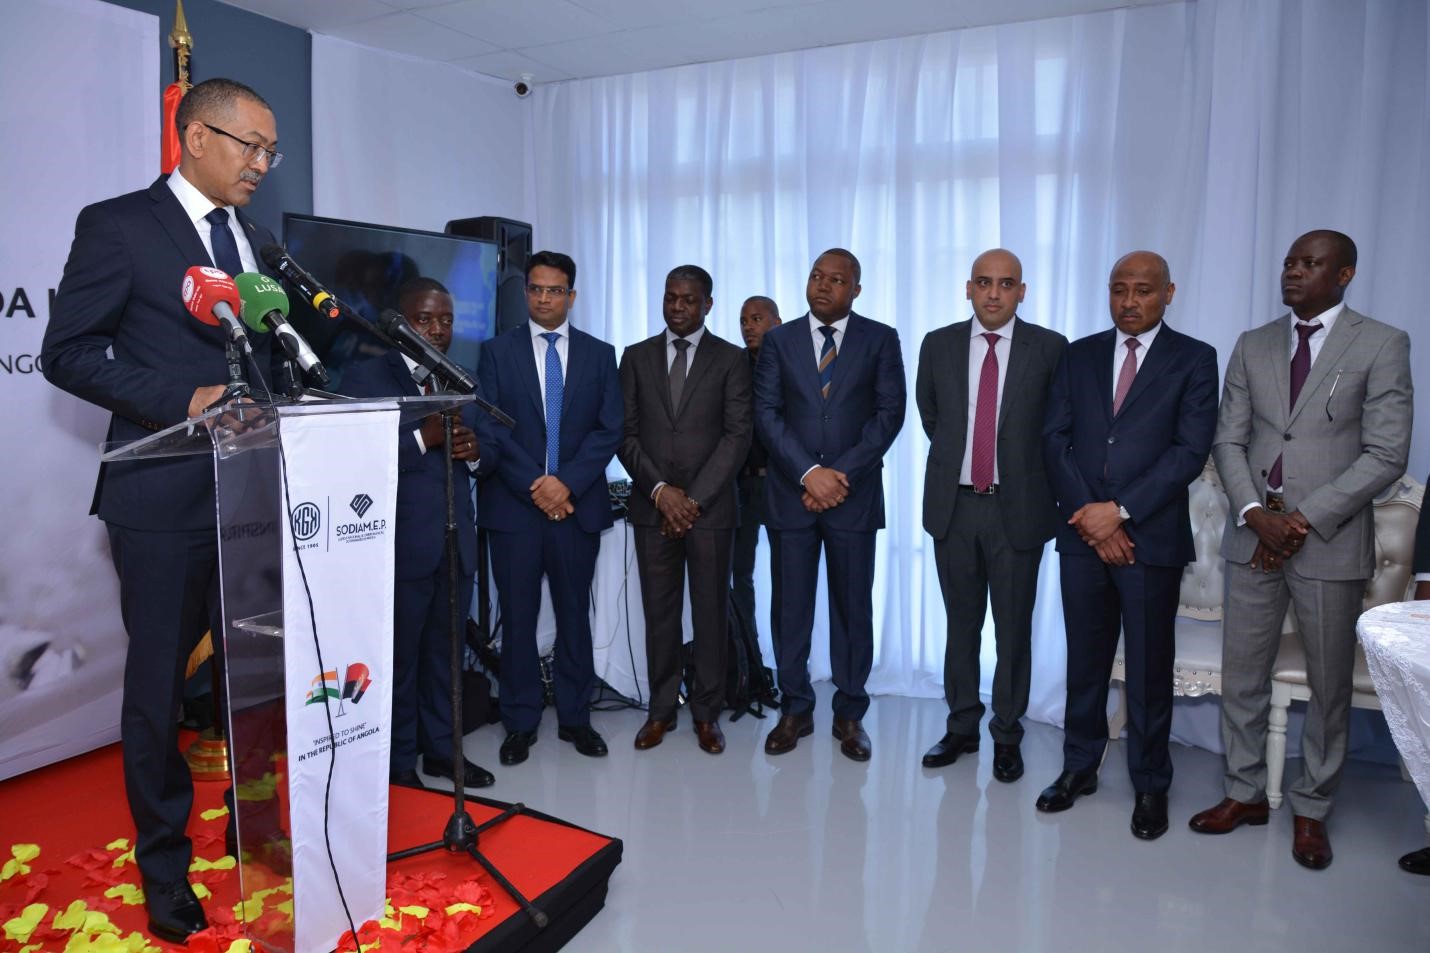 KGK contributes to the democratic ecosystem in Angola by establishing a new diamond manufacturing facility